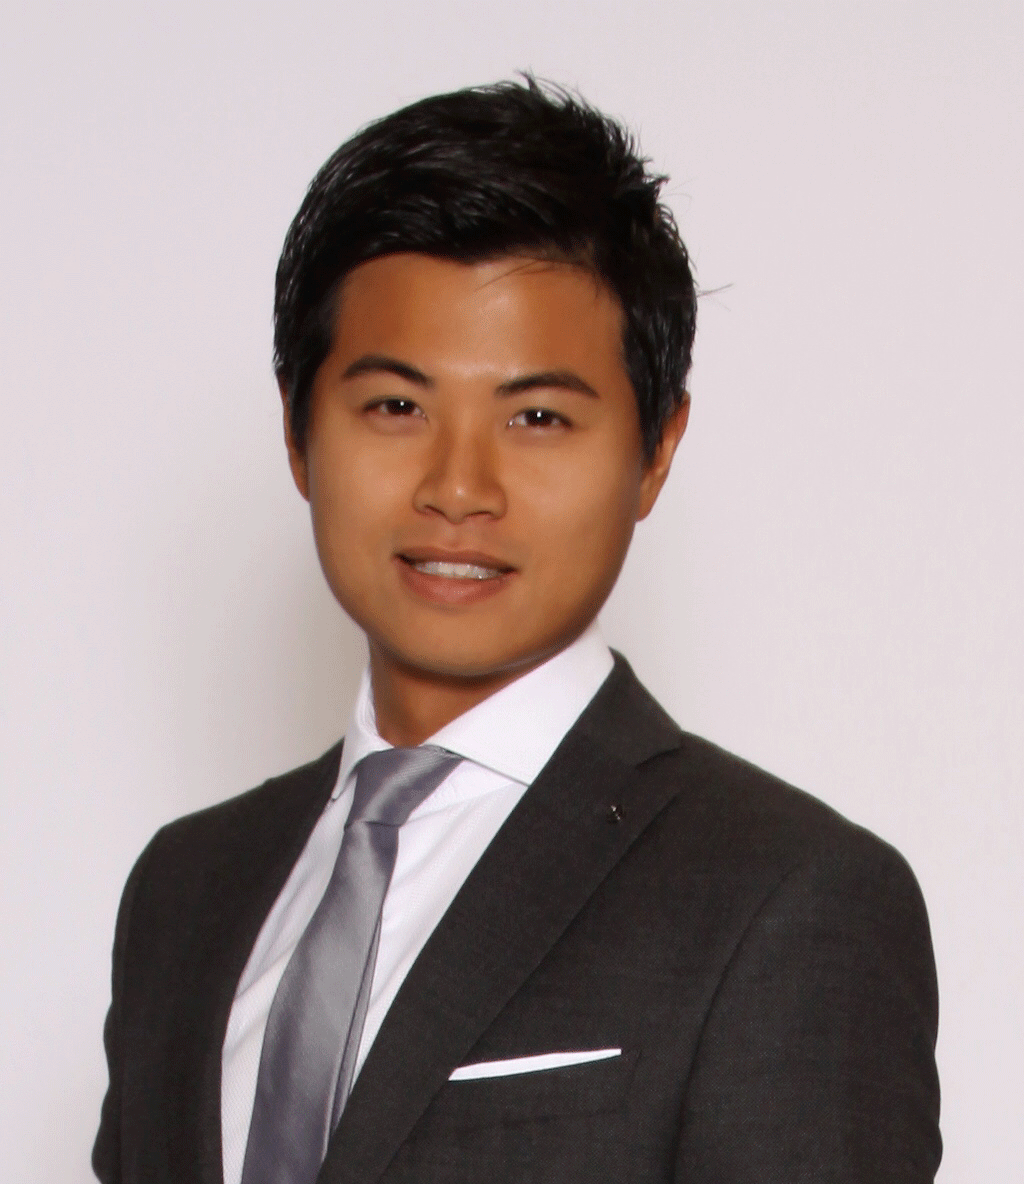 Rudy Hsieh, director of online marketing of Innovation's Crouching Tiger